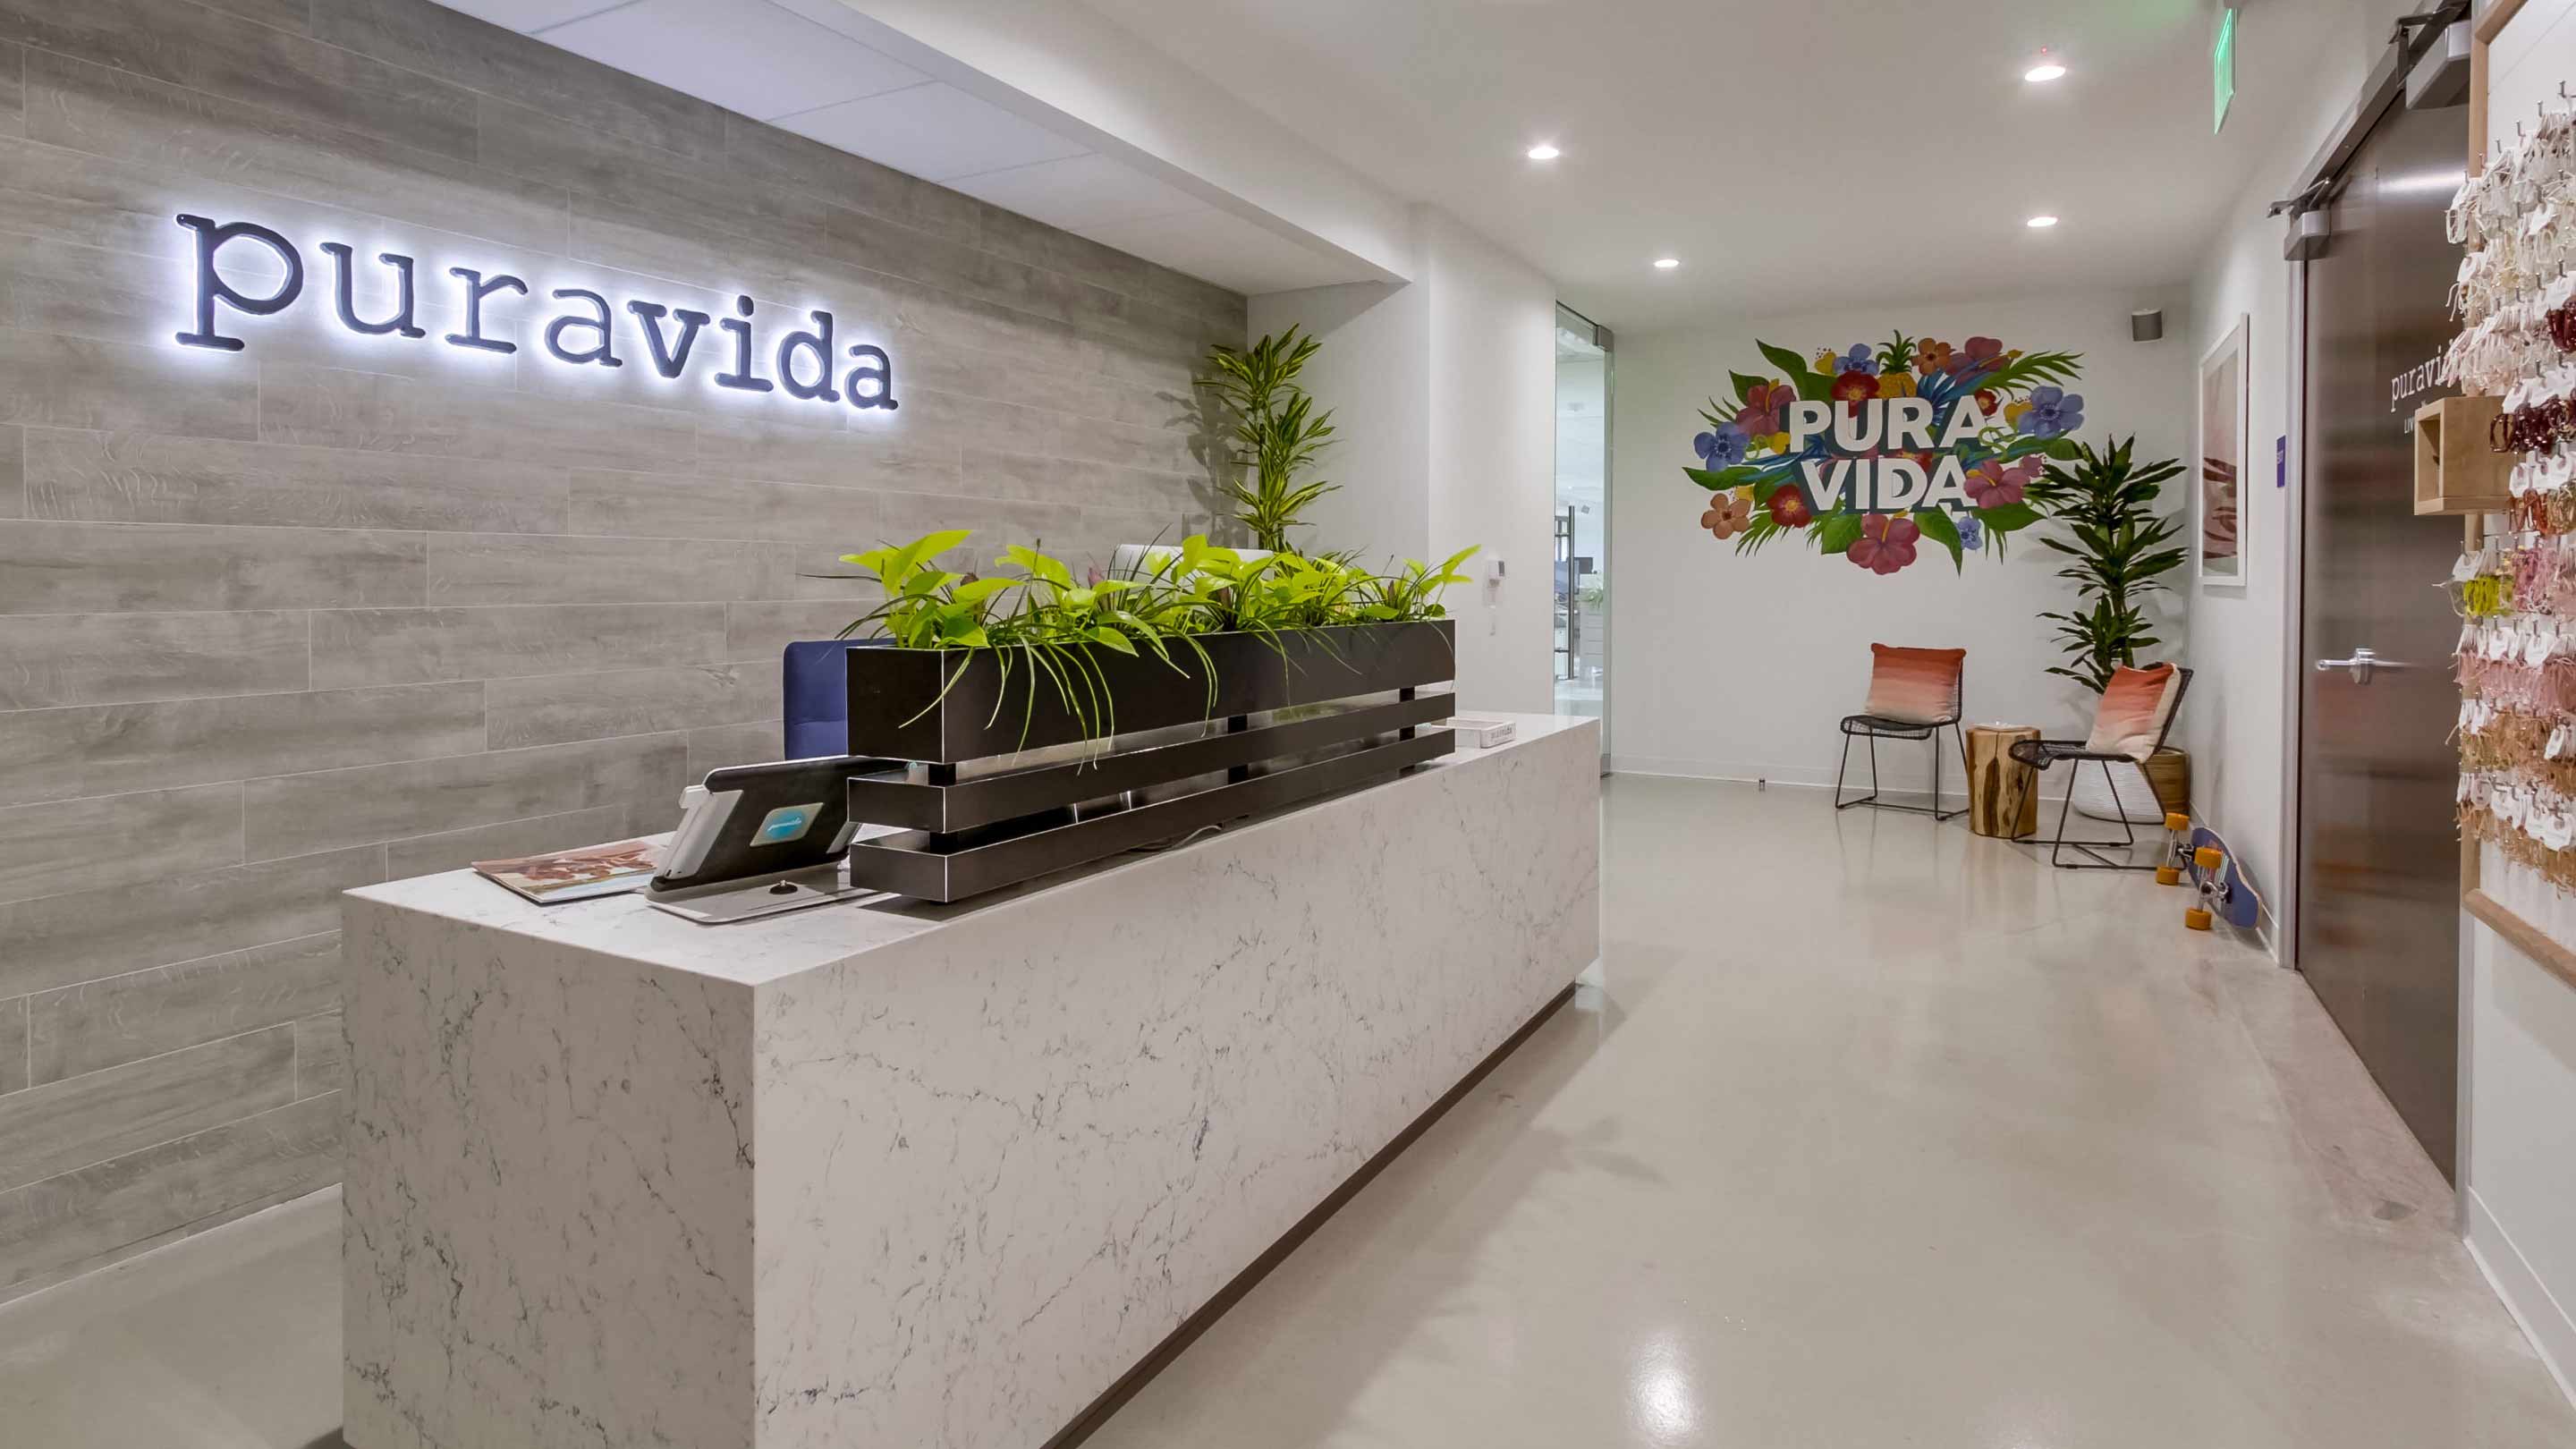 The reception area of Pura Vida’s office decorated with plants, a marble reception desk and a large floral mural.